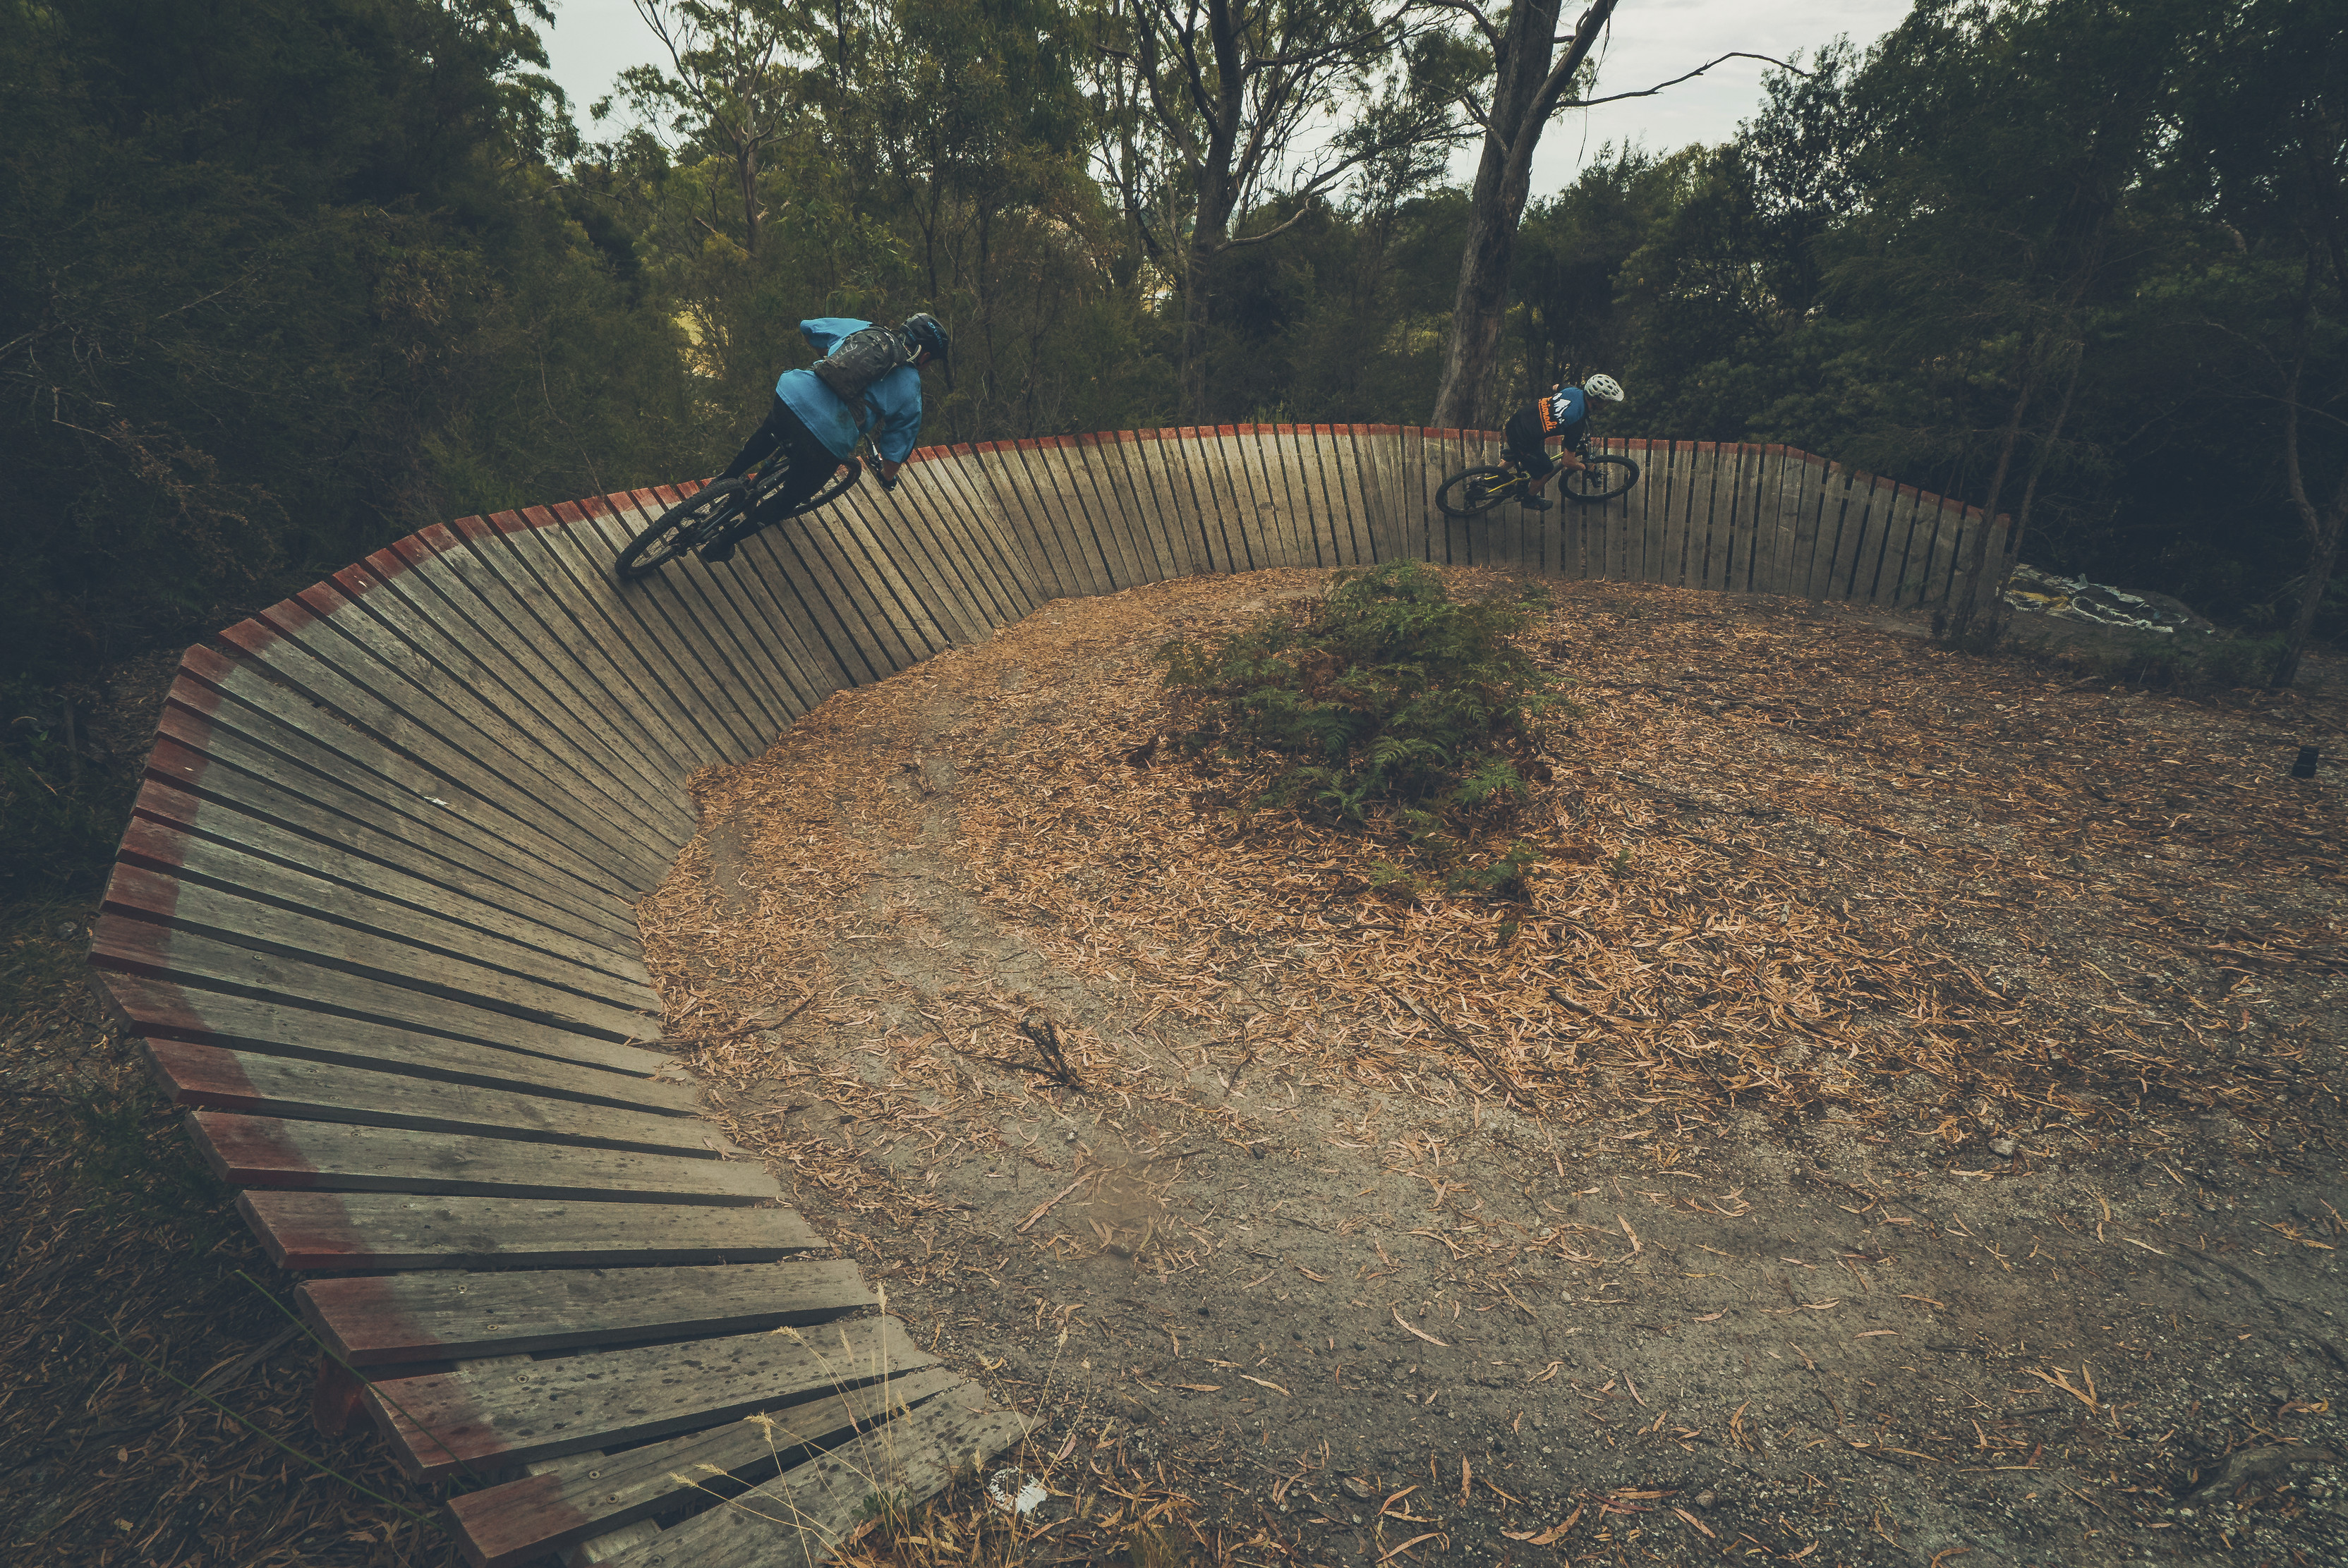 Two people riding their mountain bike around a wooden berm surrounded by lush bushland, located at the Penguin Mountain Bike Park.